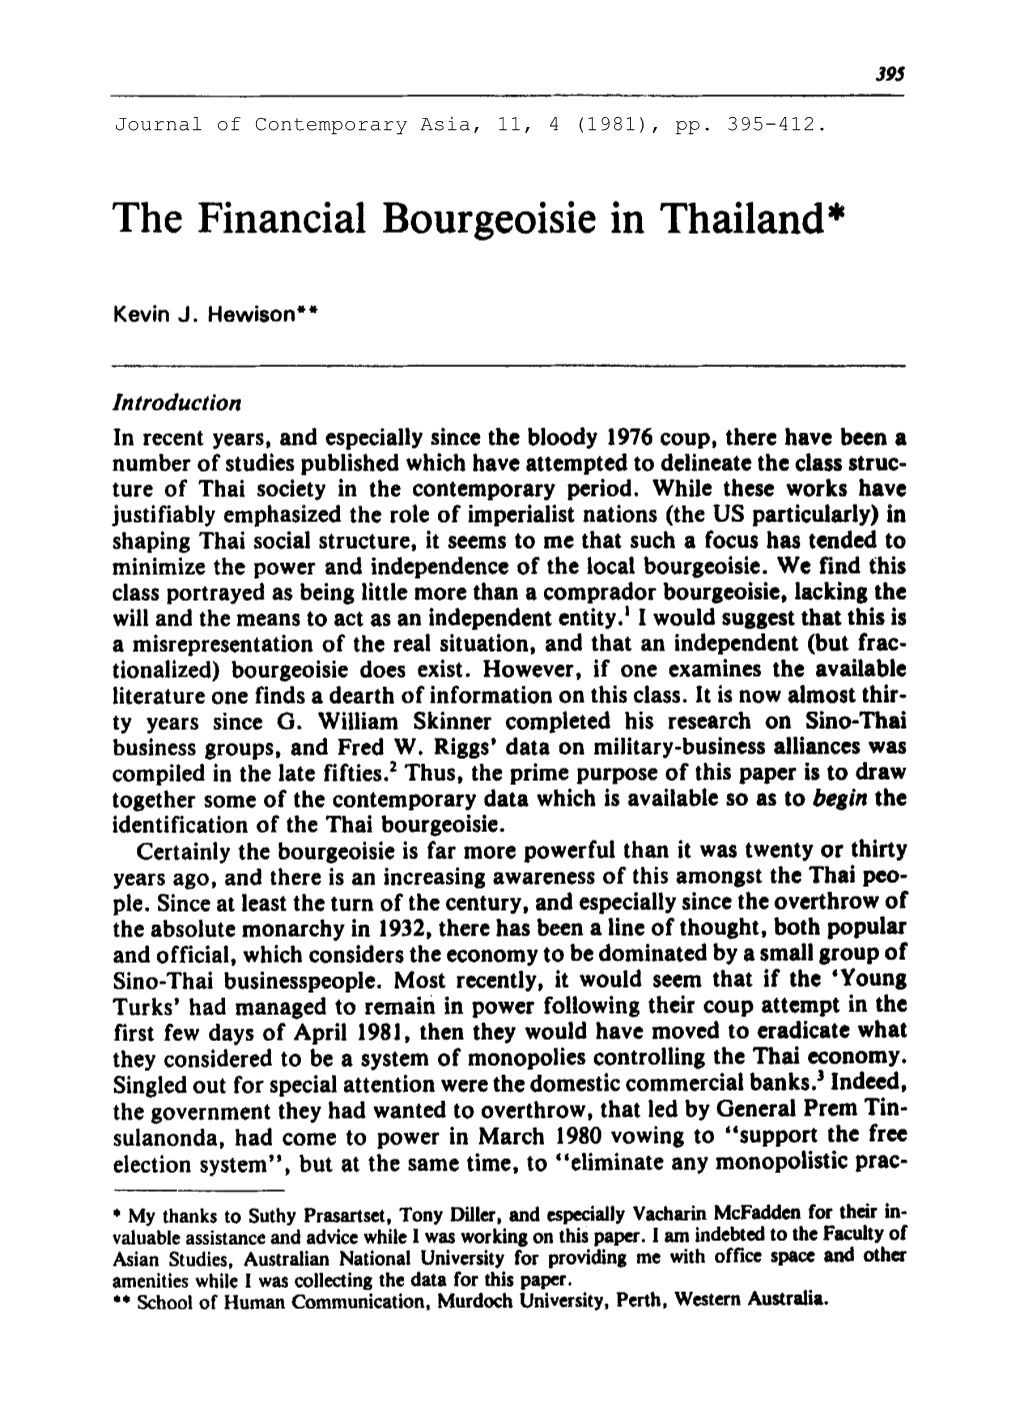 The Financial Bourgeoisie in Thailand*